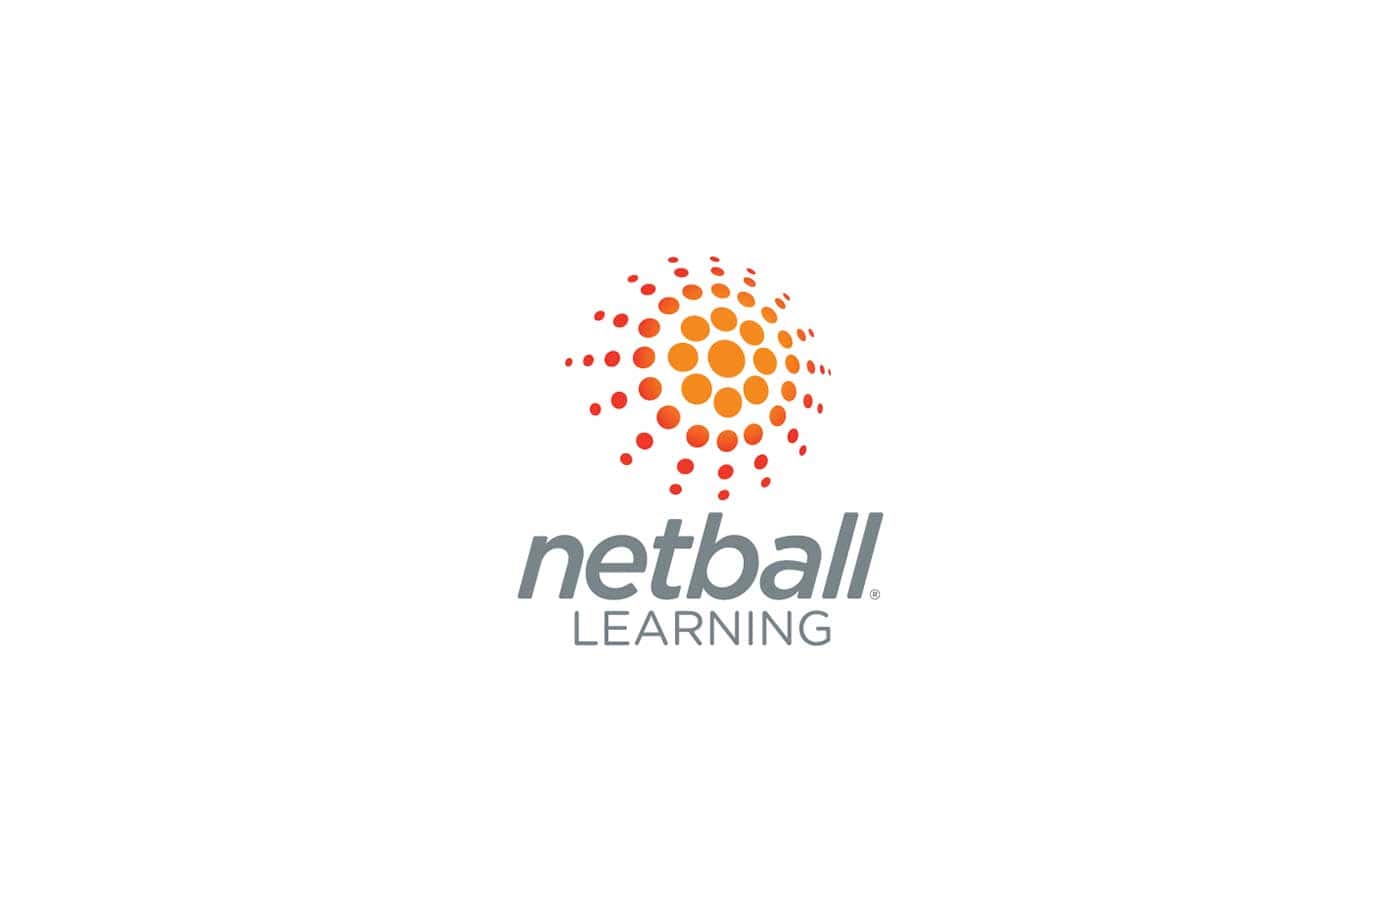 Netball Learning - How to log into netball learning